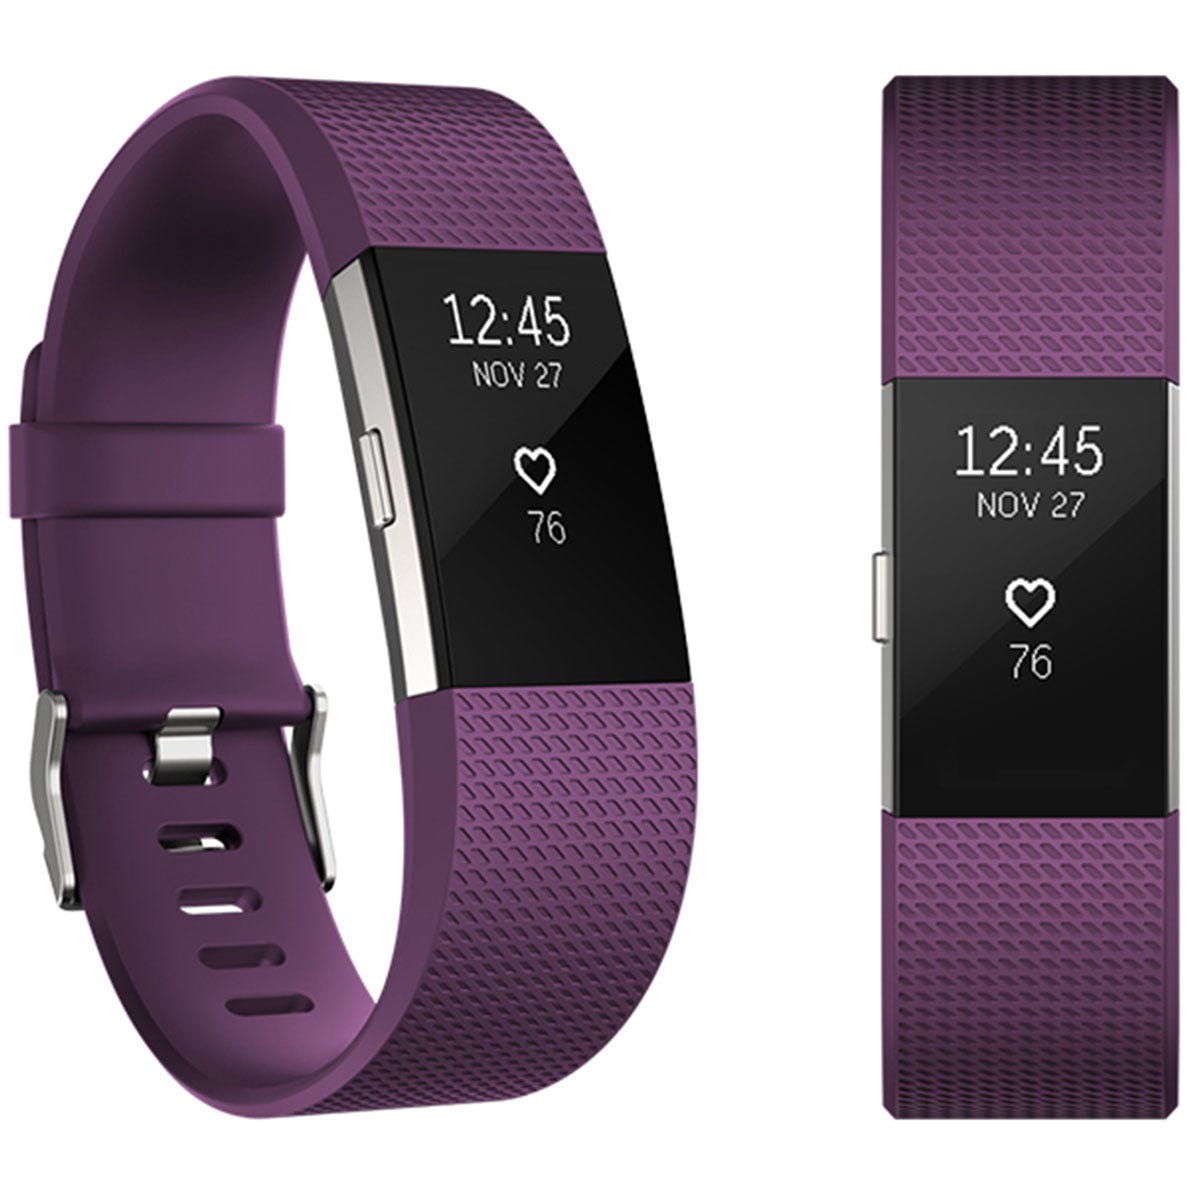 Fitbit Large Charge 2 - Plum